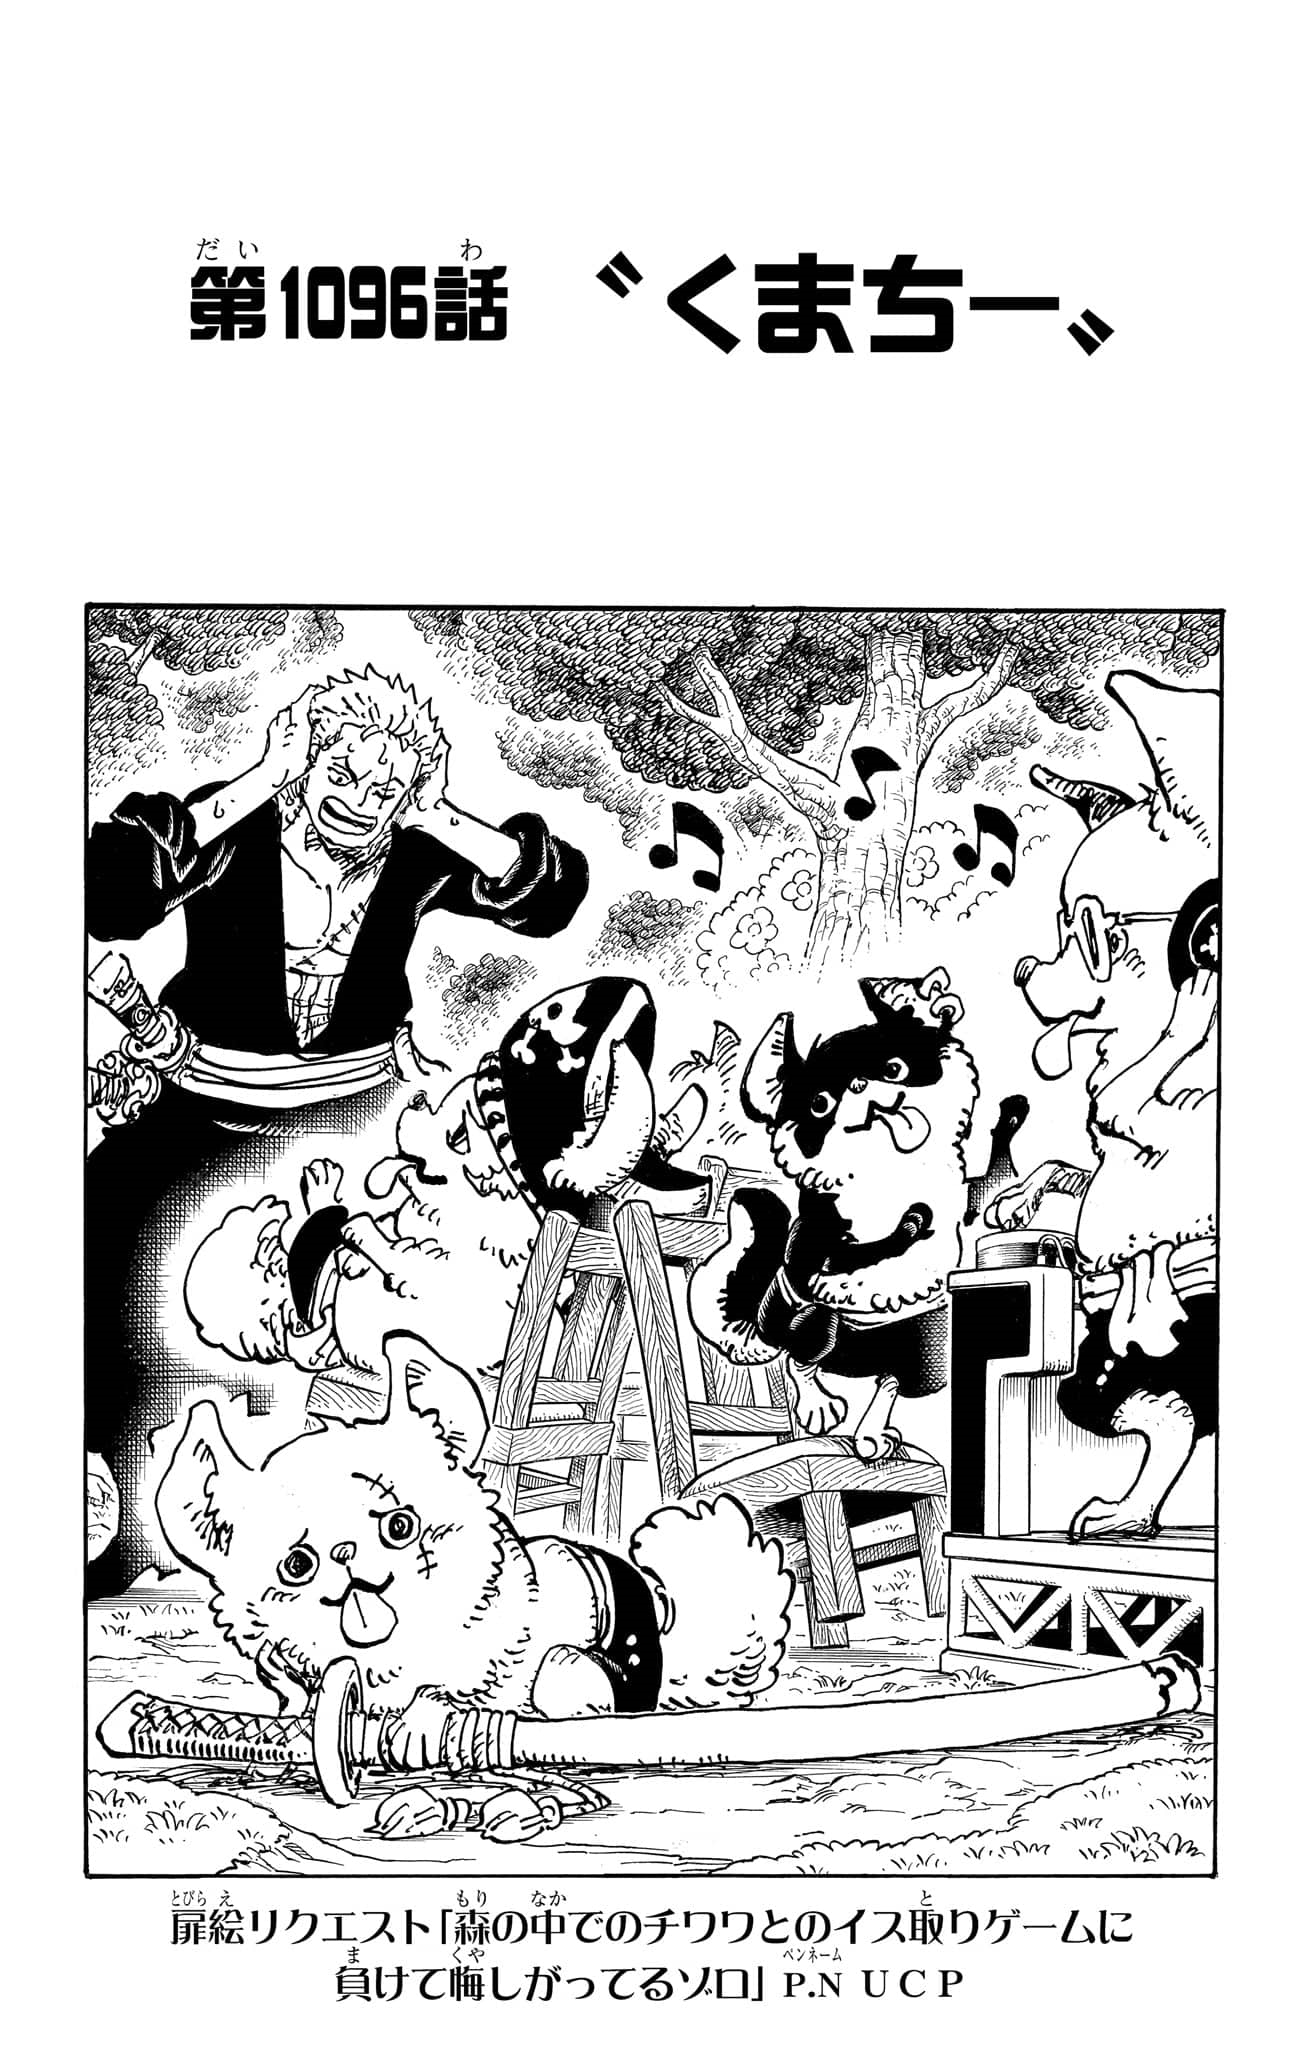 One Piece Chapter 1061 Spoiler! English! (Summary at the Comment